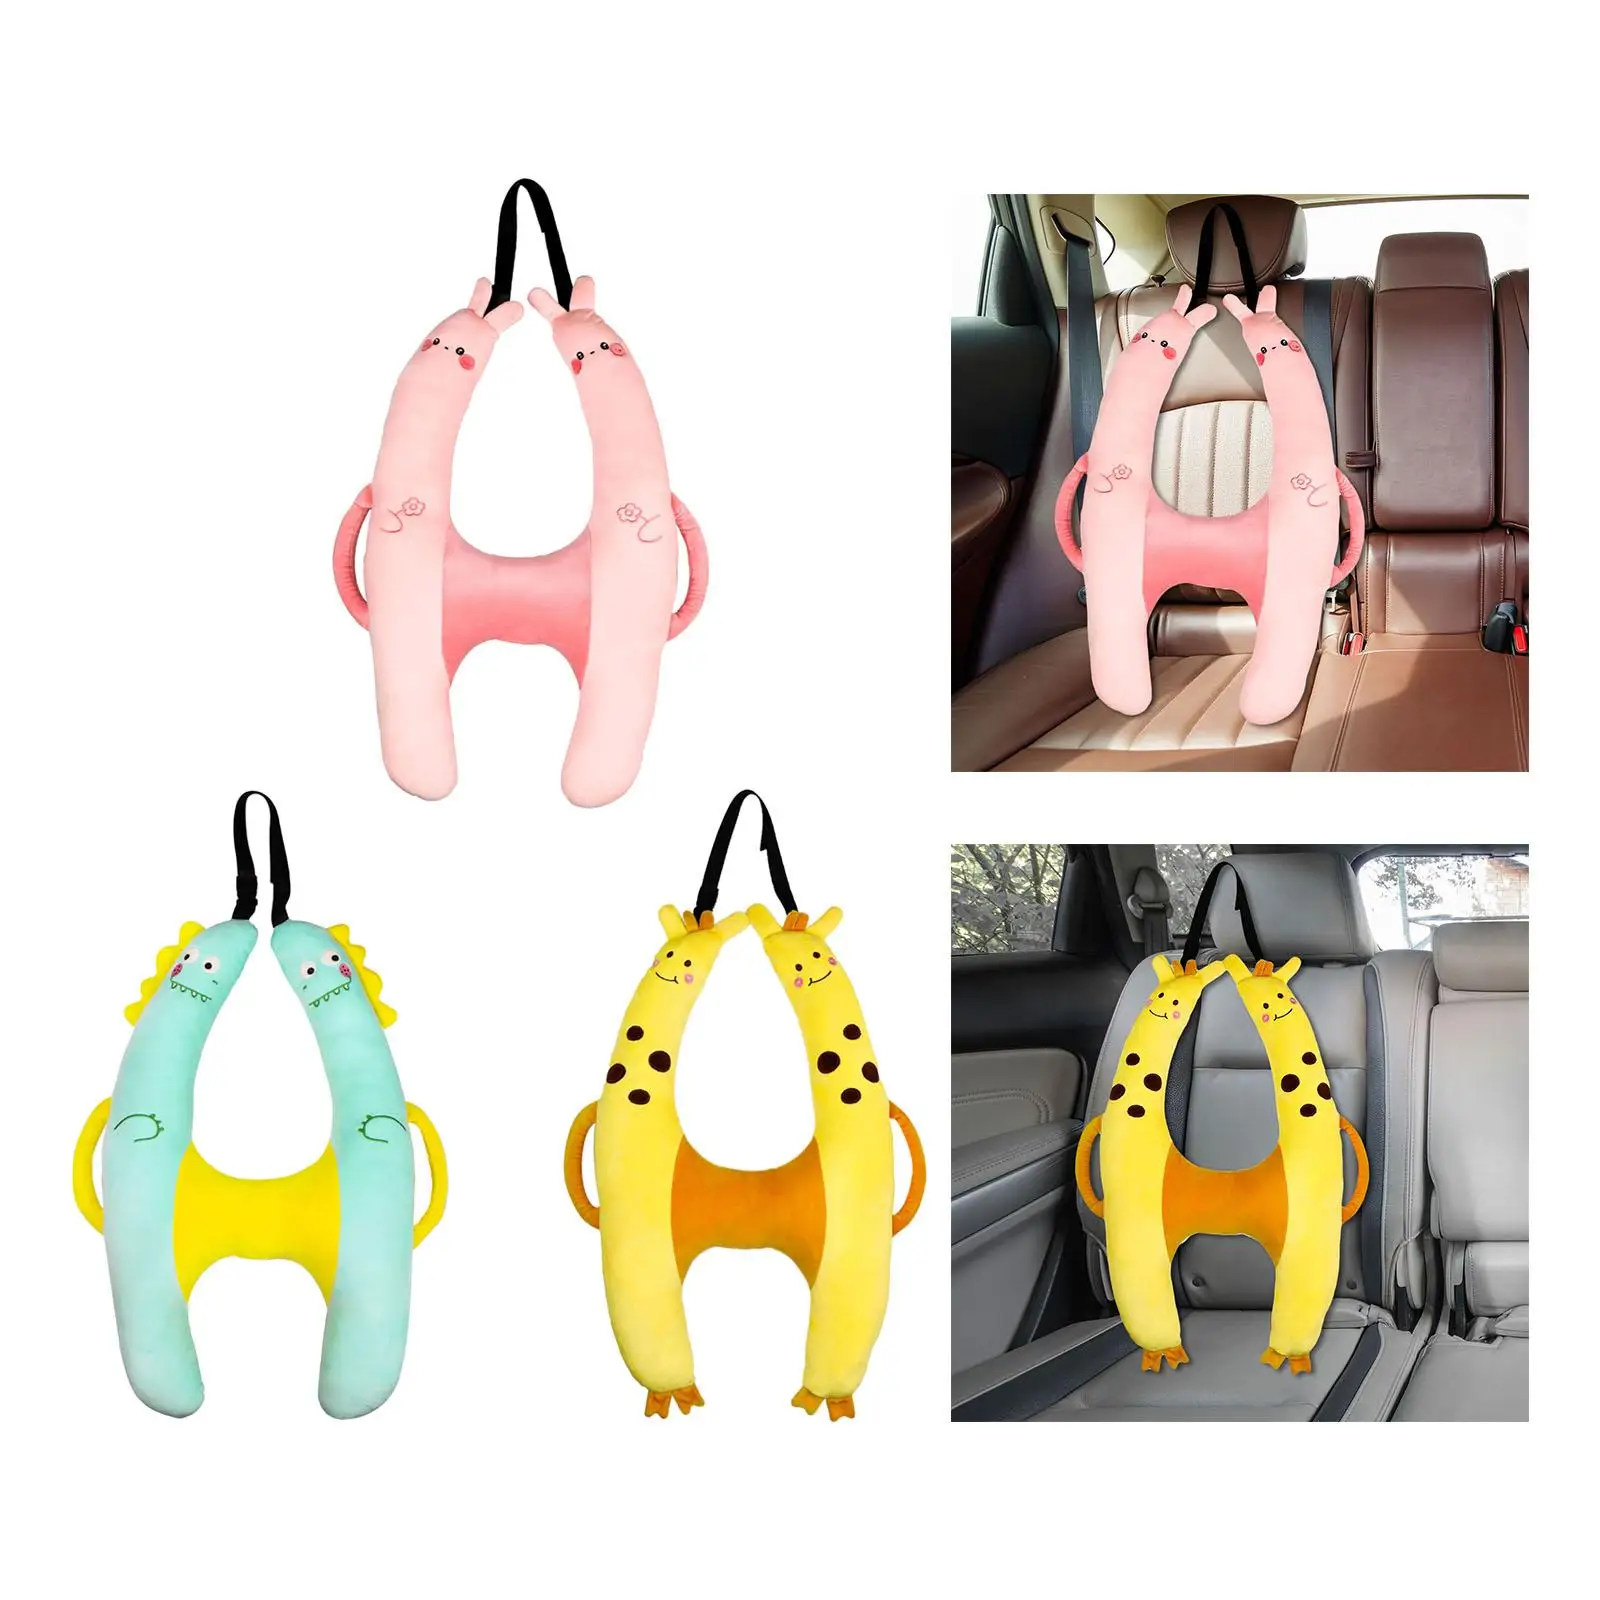 Car Backseat Travel Pillow Cushion Easy to Install Support Head and Body for Children Road Trips Use Auto Accessories Soft